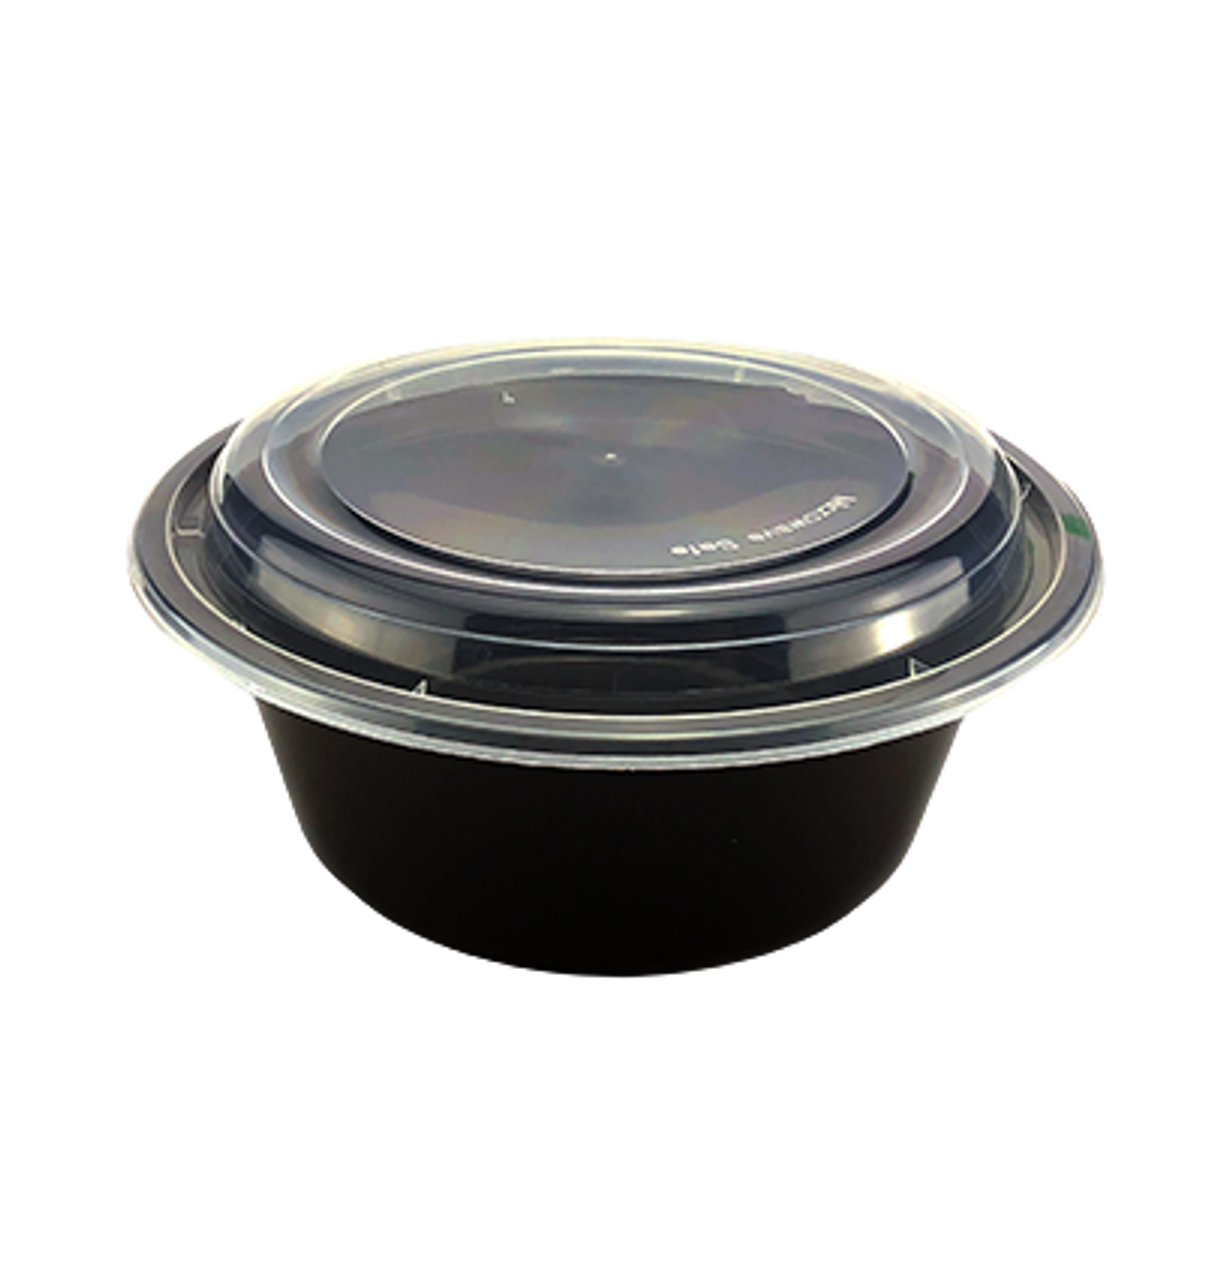 Meal Prep Containers 40oz Round Bowls with Lids, Disposable Food